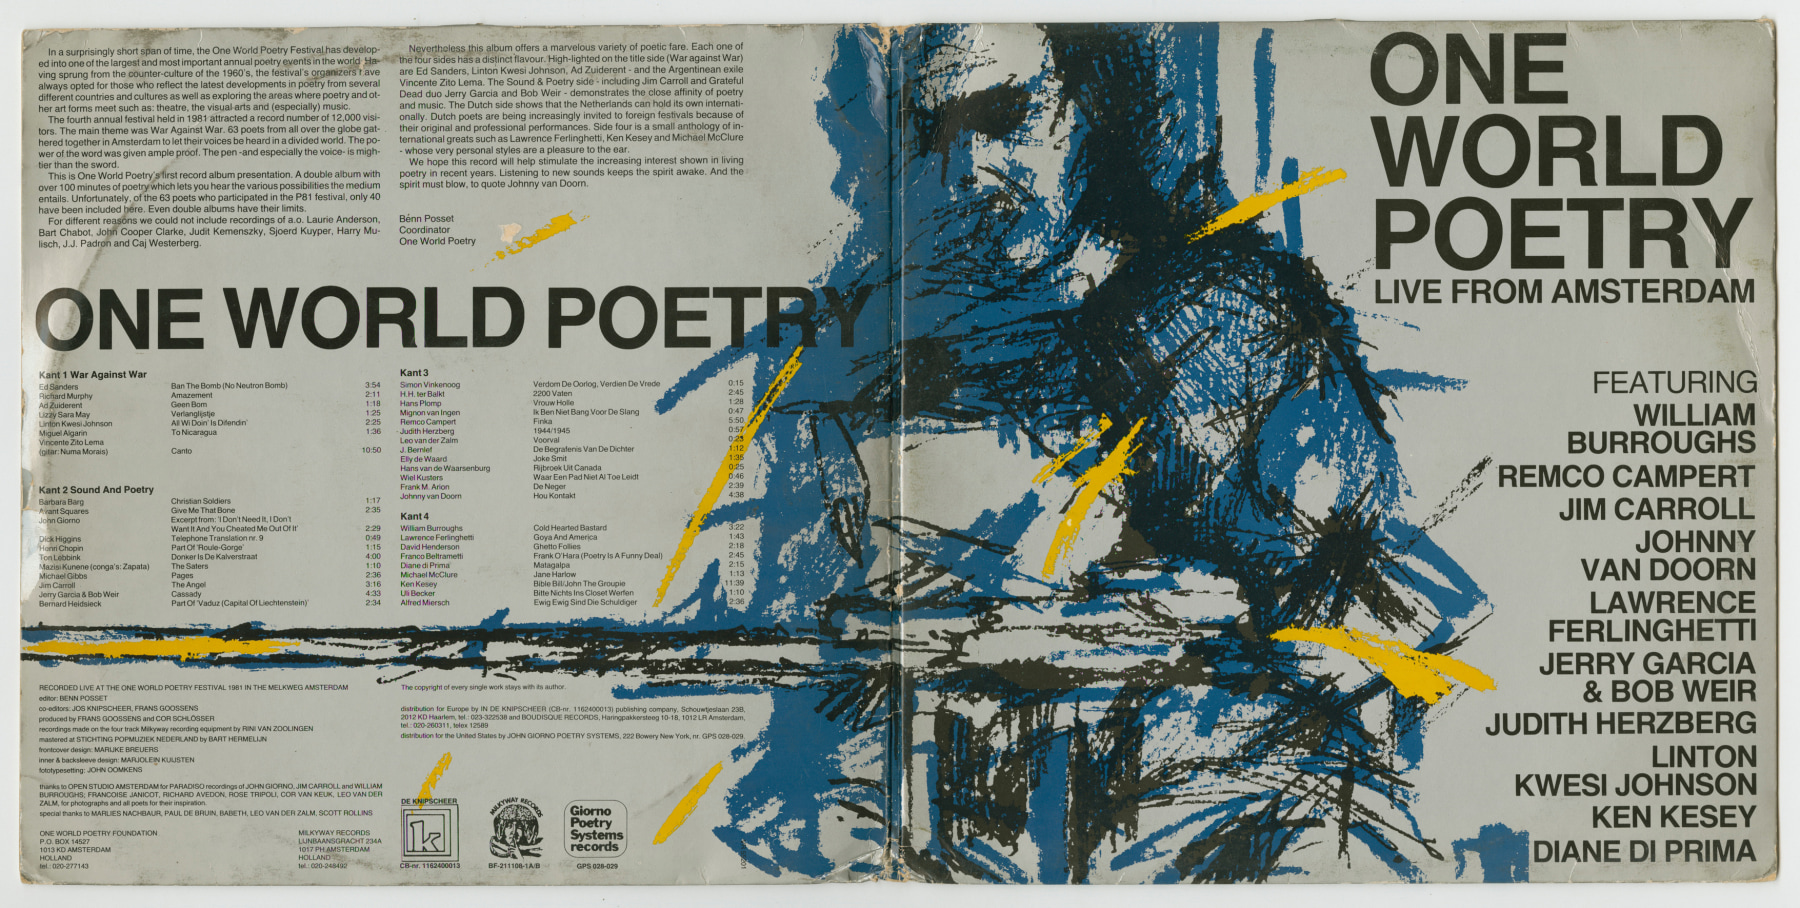 One World Poetry Live from Amsterdam (1981), front and back covers